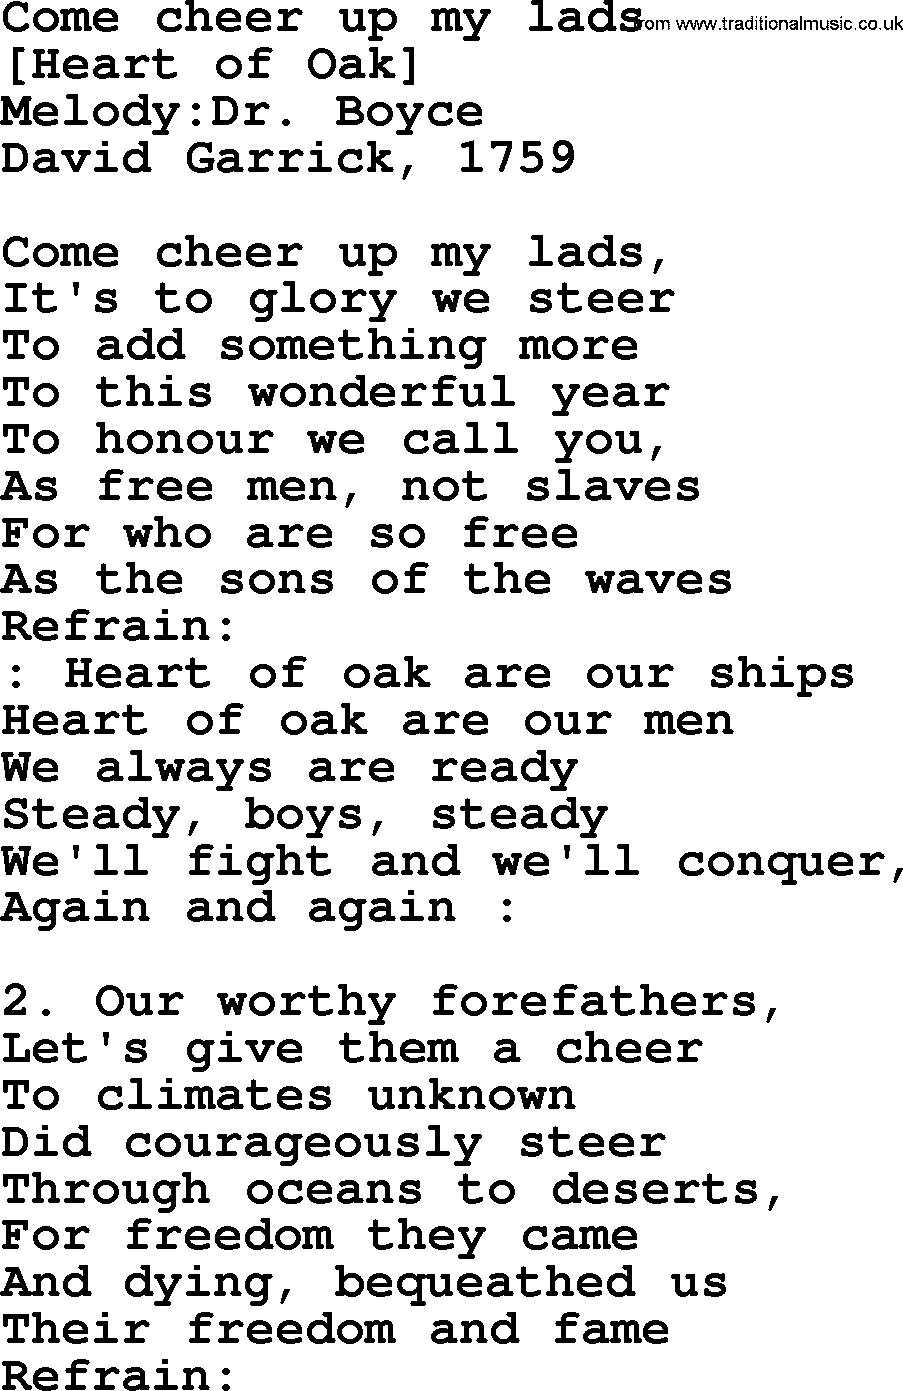 Old English Song: Come Cheer Up My Lads lyrics